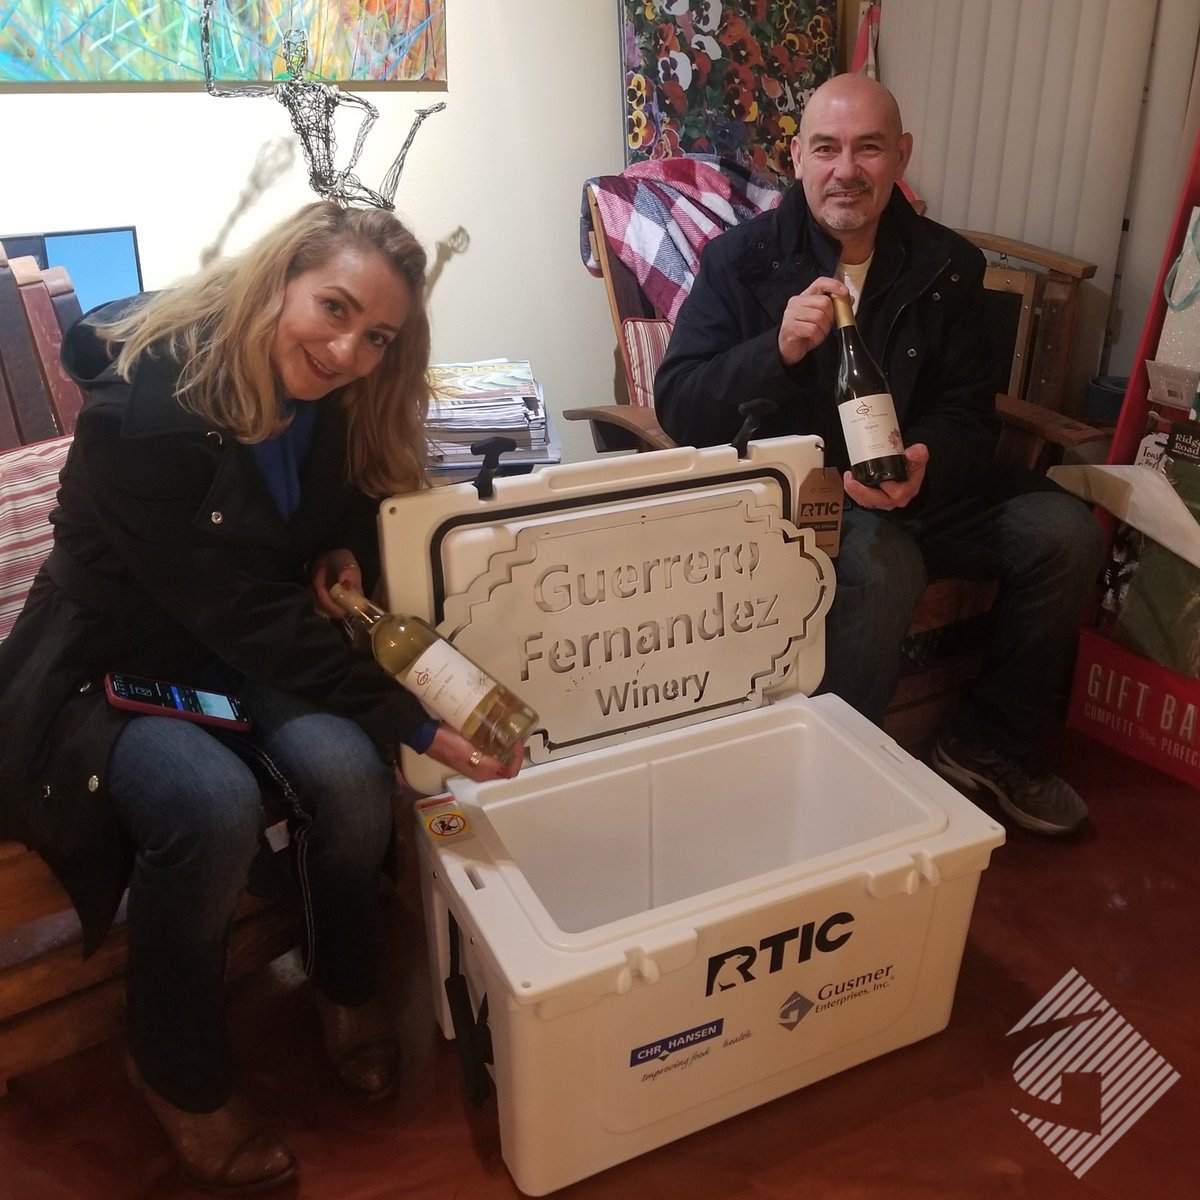 Congratulations to Olga and Martin from the @GuerreroWinery Fernandez Winery on winning the cooler from the WINEXPO show. We hope to see you all again next year!